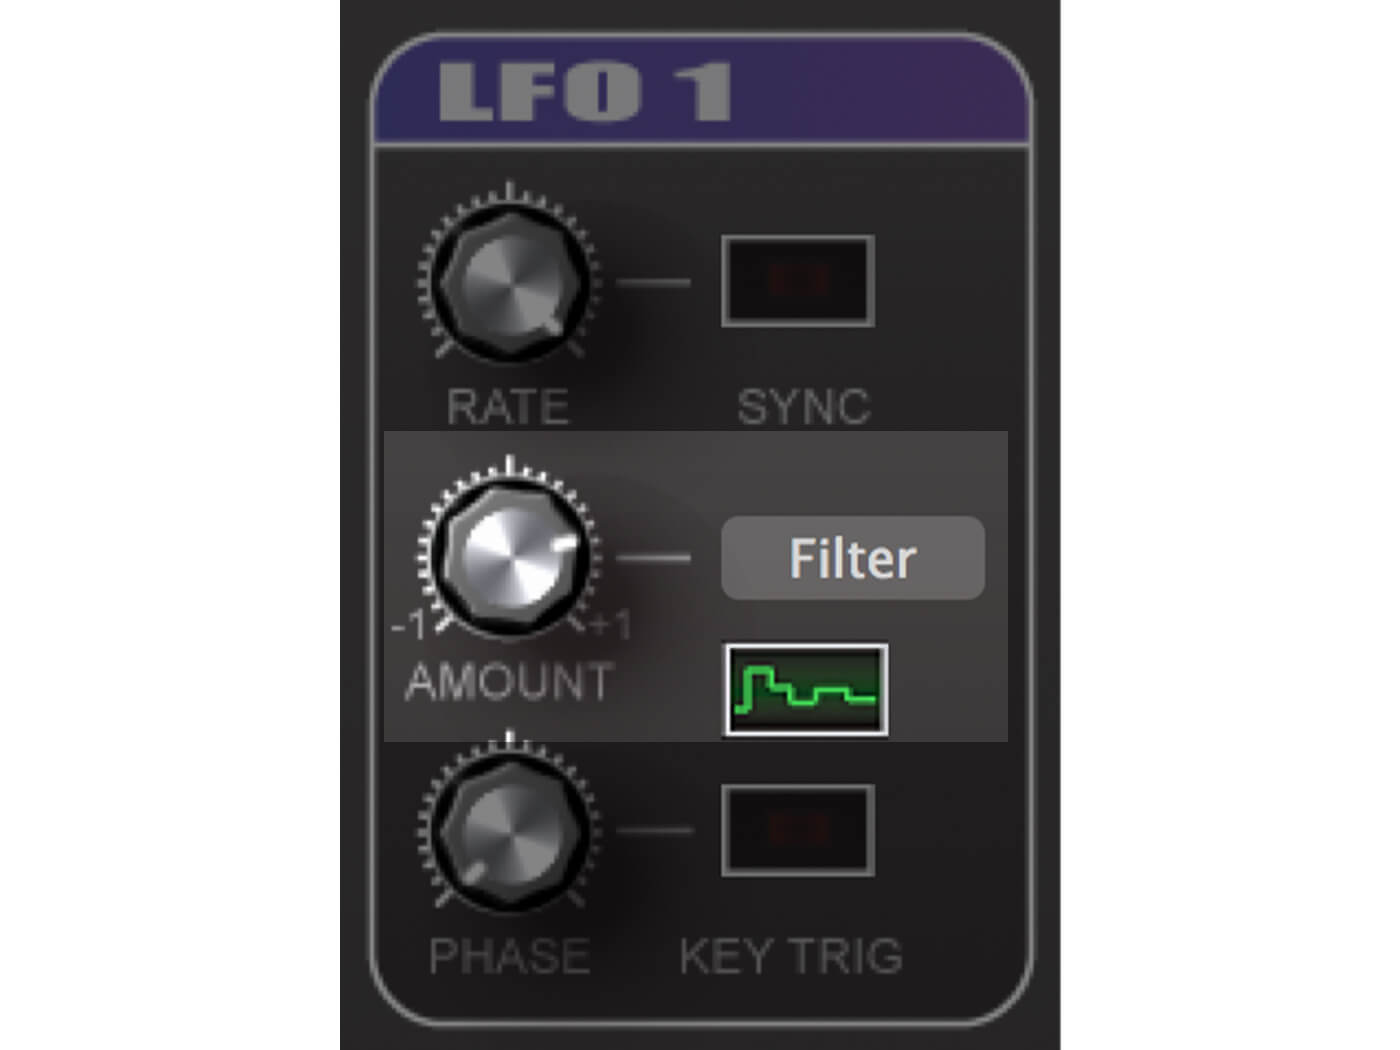 WW-TAL-Noisemaker-P11 - LFO 1 Sample & Hold high rate